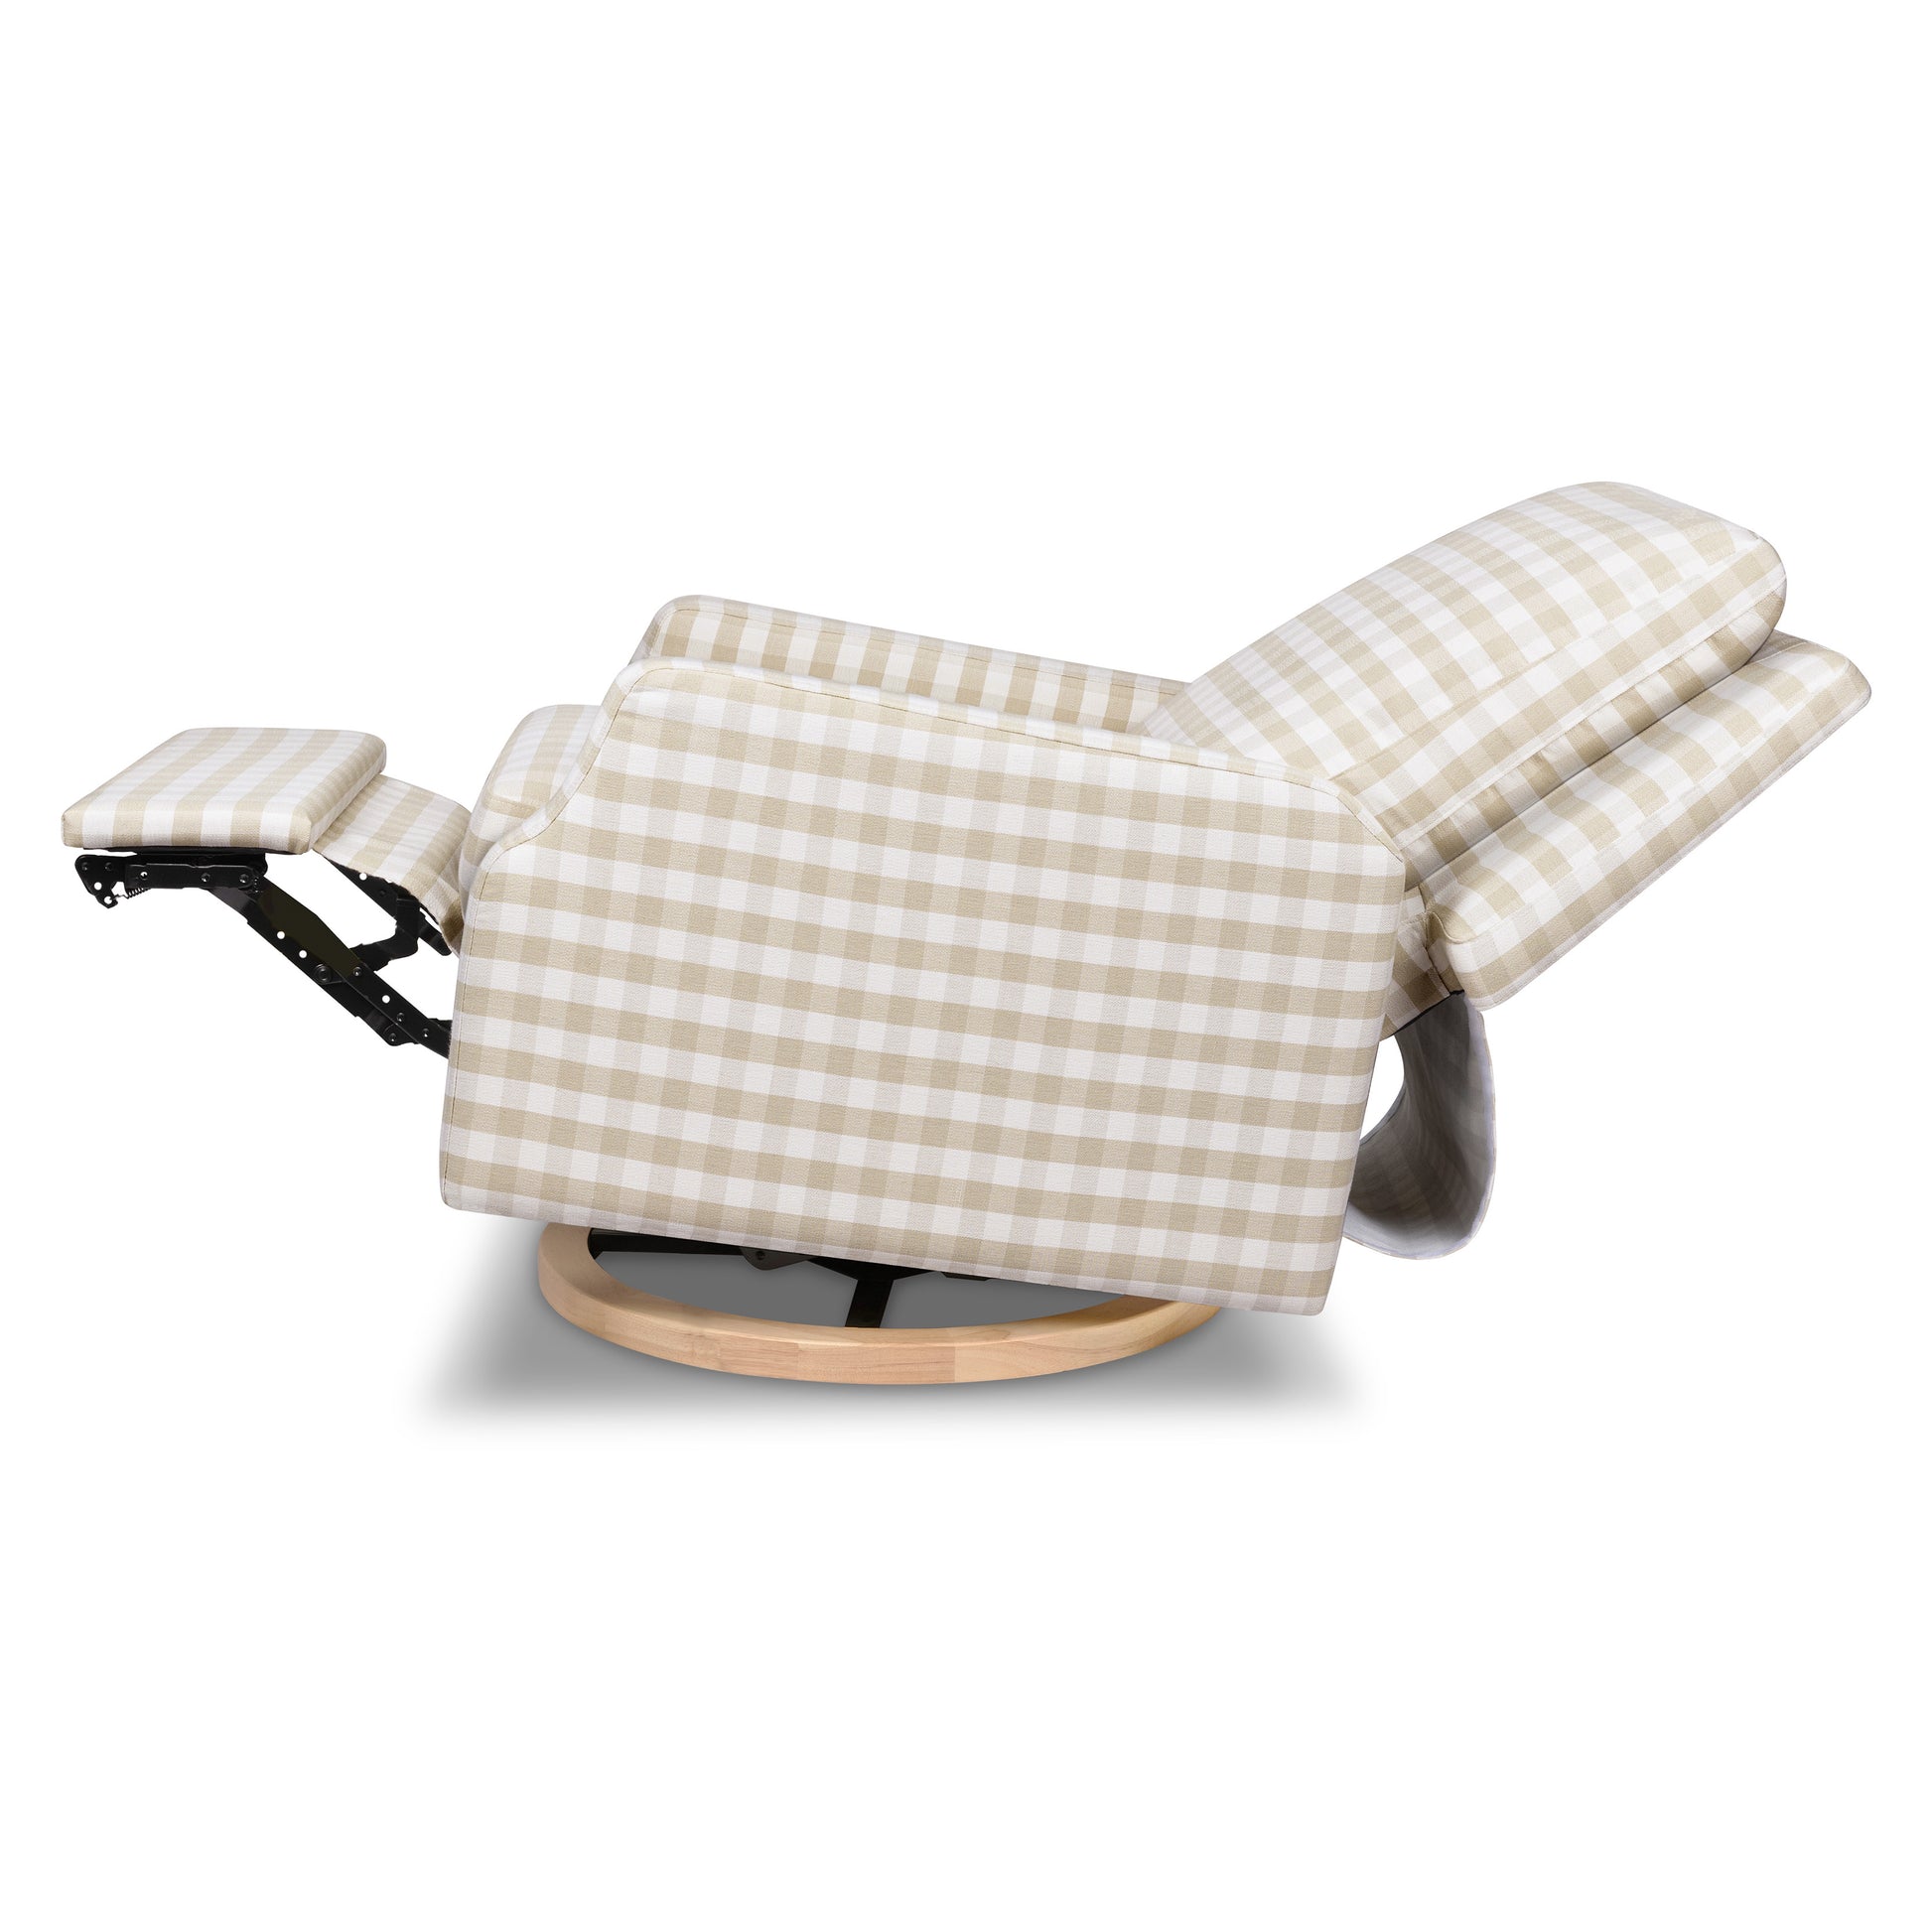 M22286TGHLB,Crewe Electronic Swivel Glider Recliner in Tan Gingham with Light Wood Base